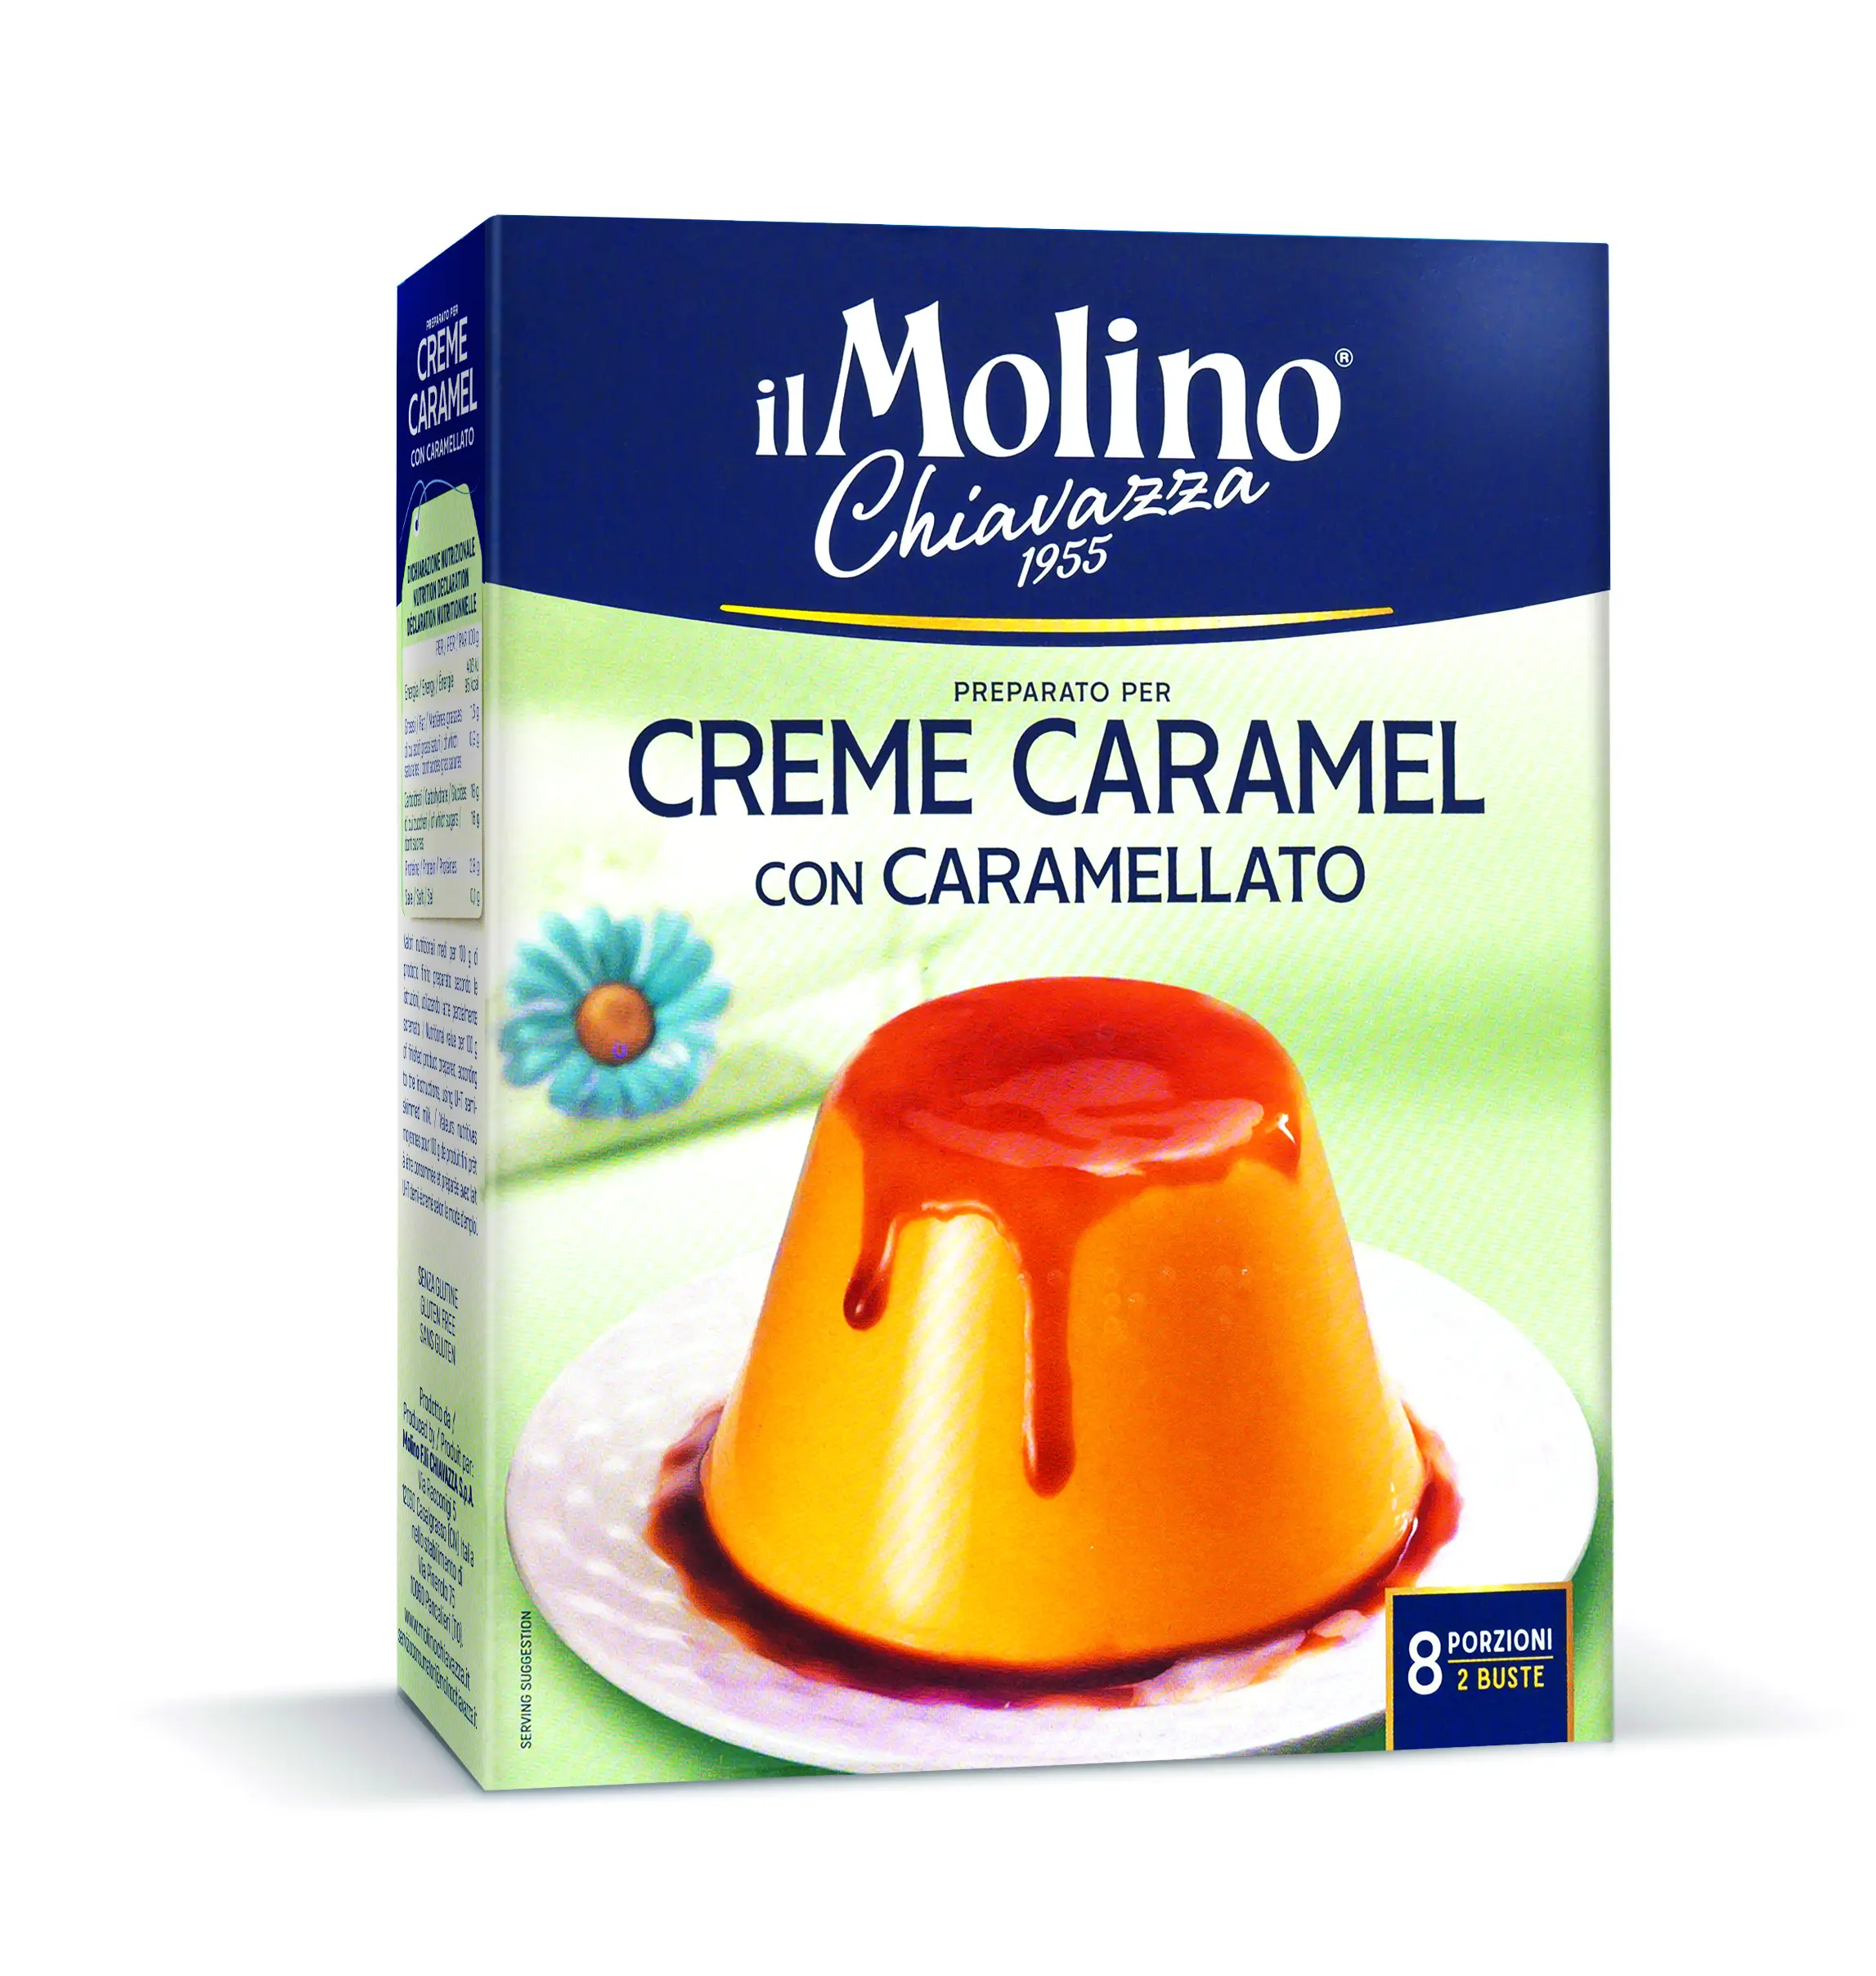 High Quality 100% Natural CREME CARAMEL Ideal for Several and Professional Uses Made in Italy Ready for Shipping